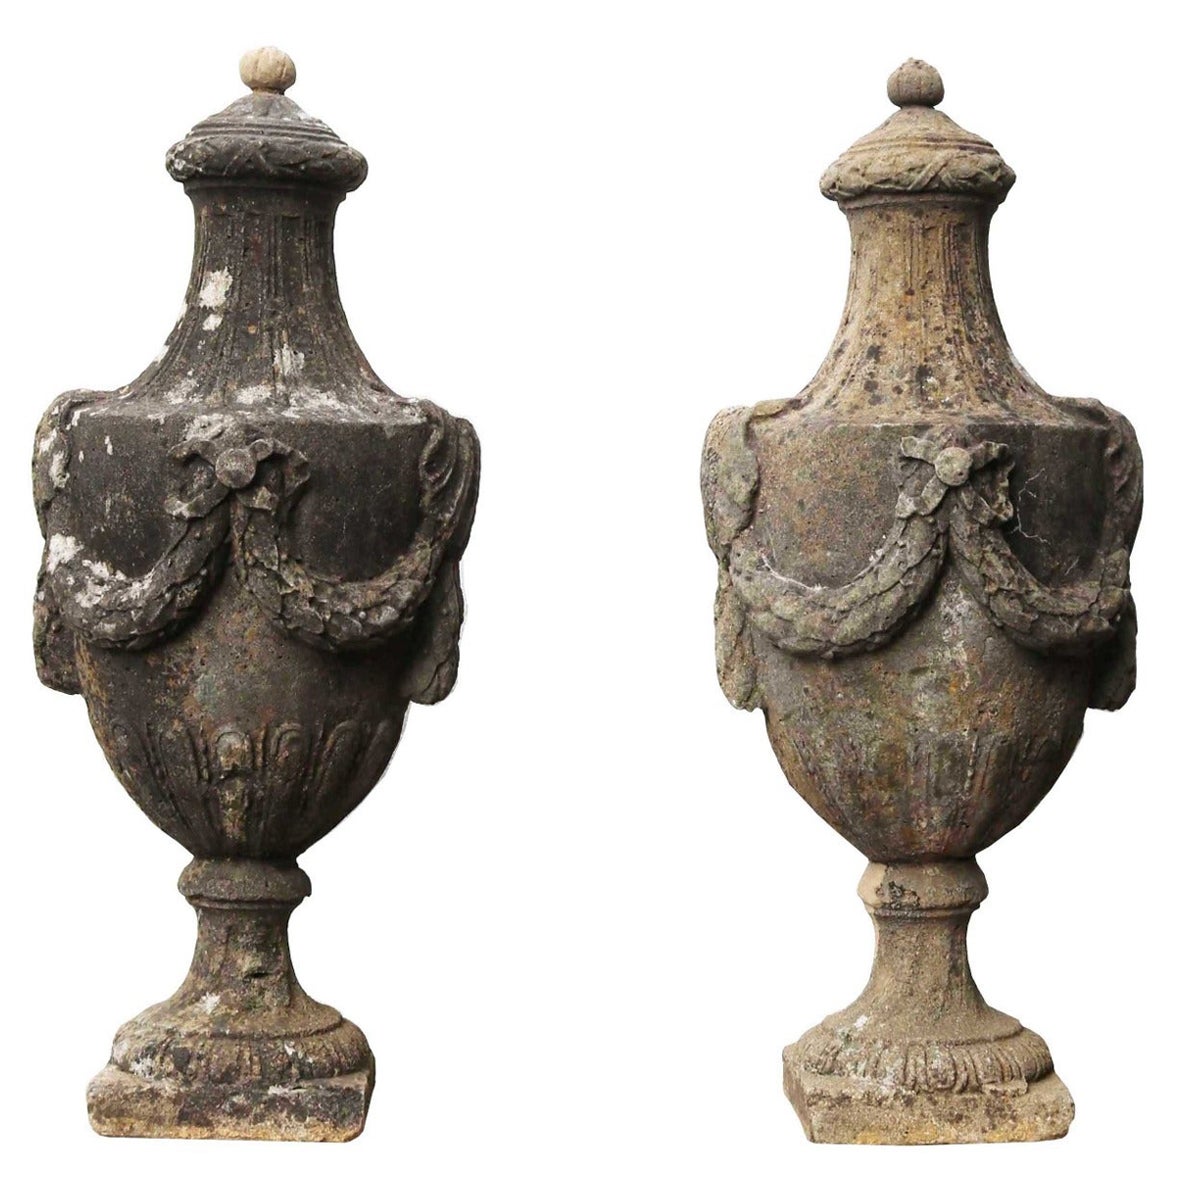 Two Coade Style Lidded Urns